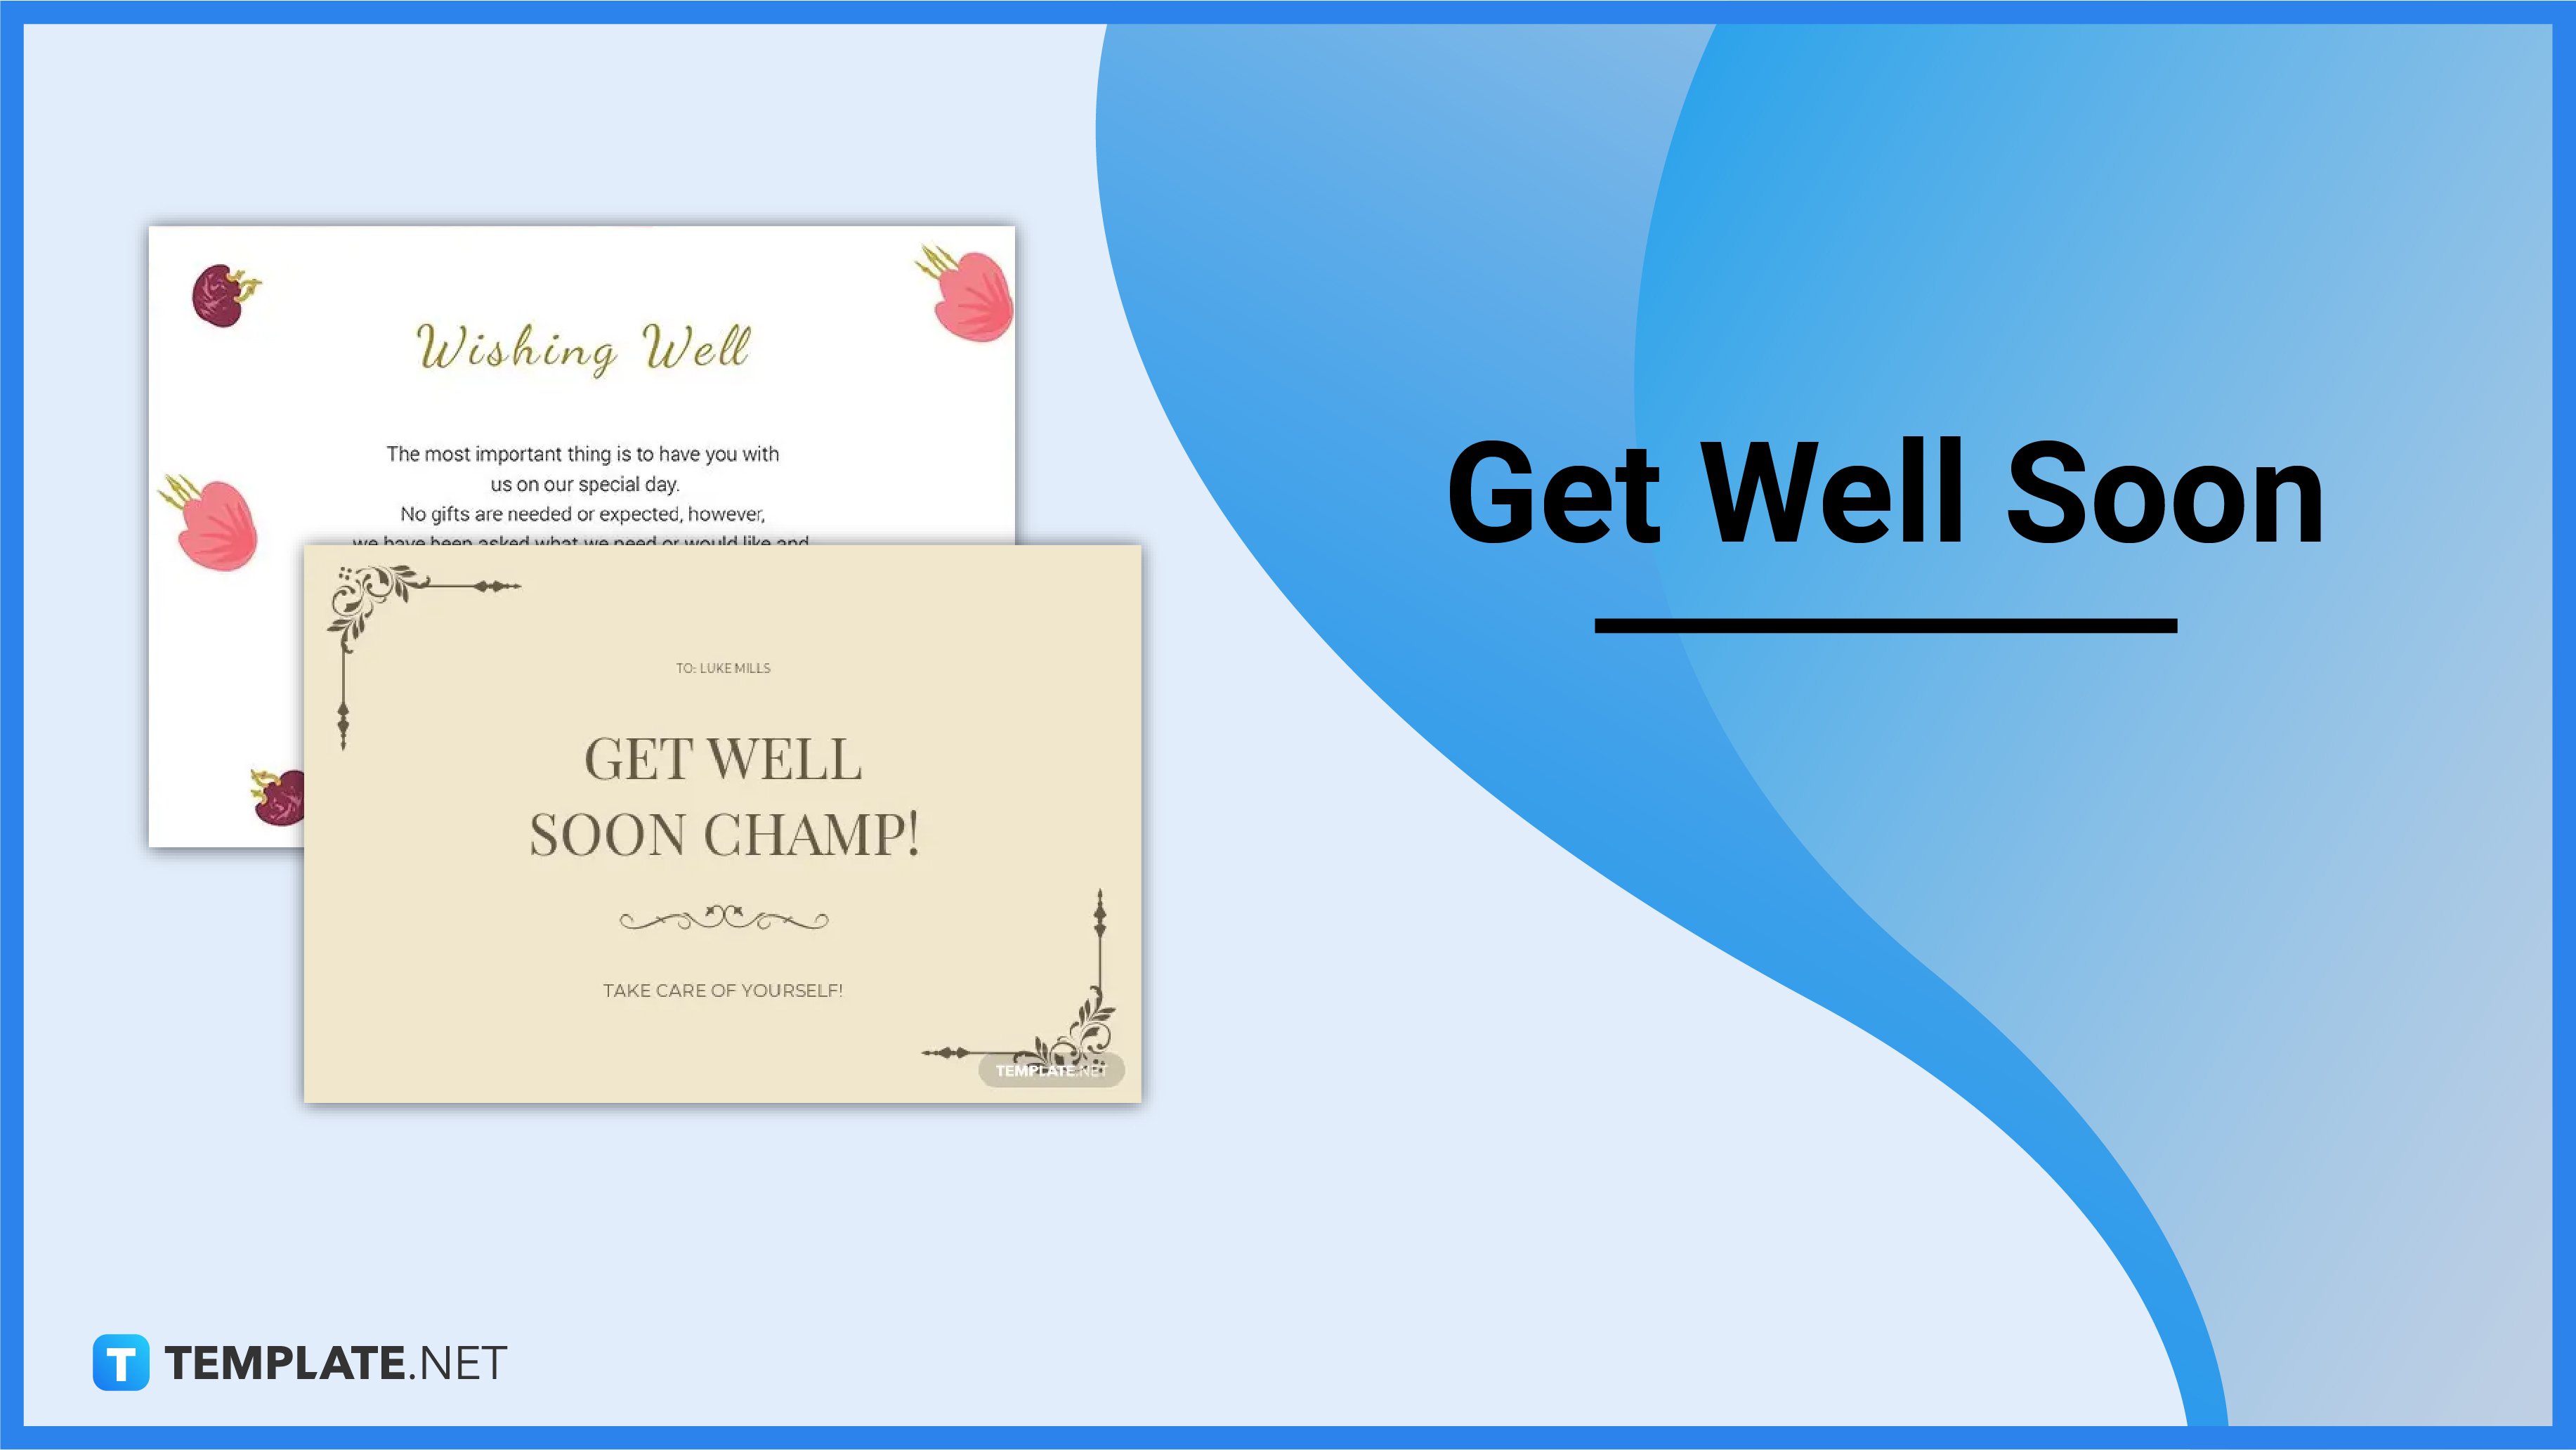 Free Vector  Get well soon with bear